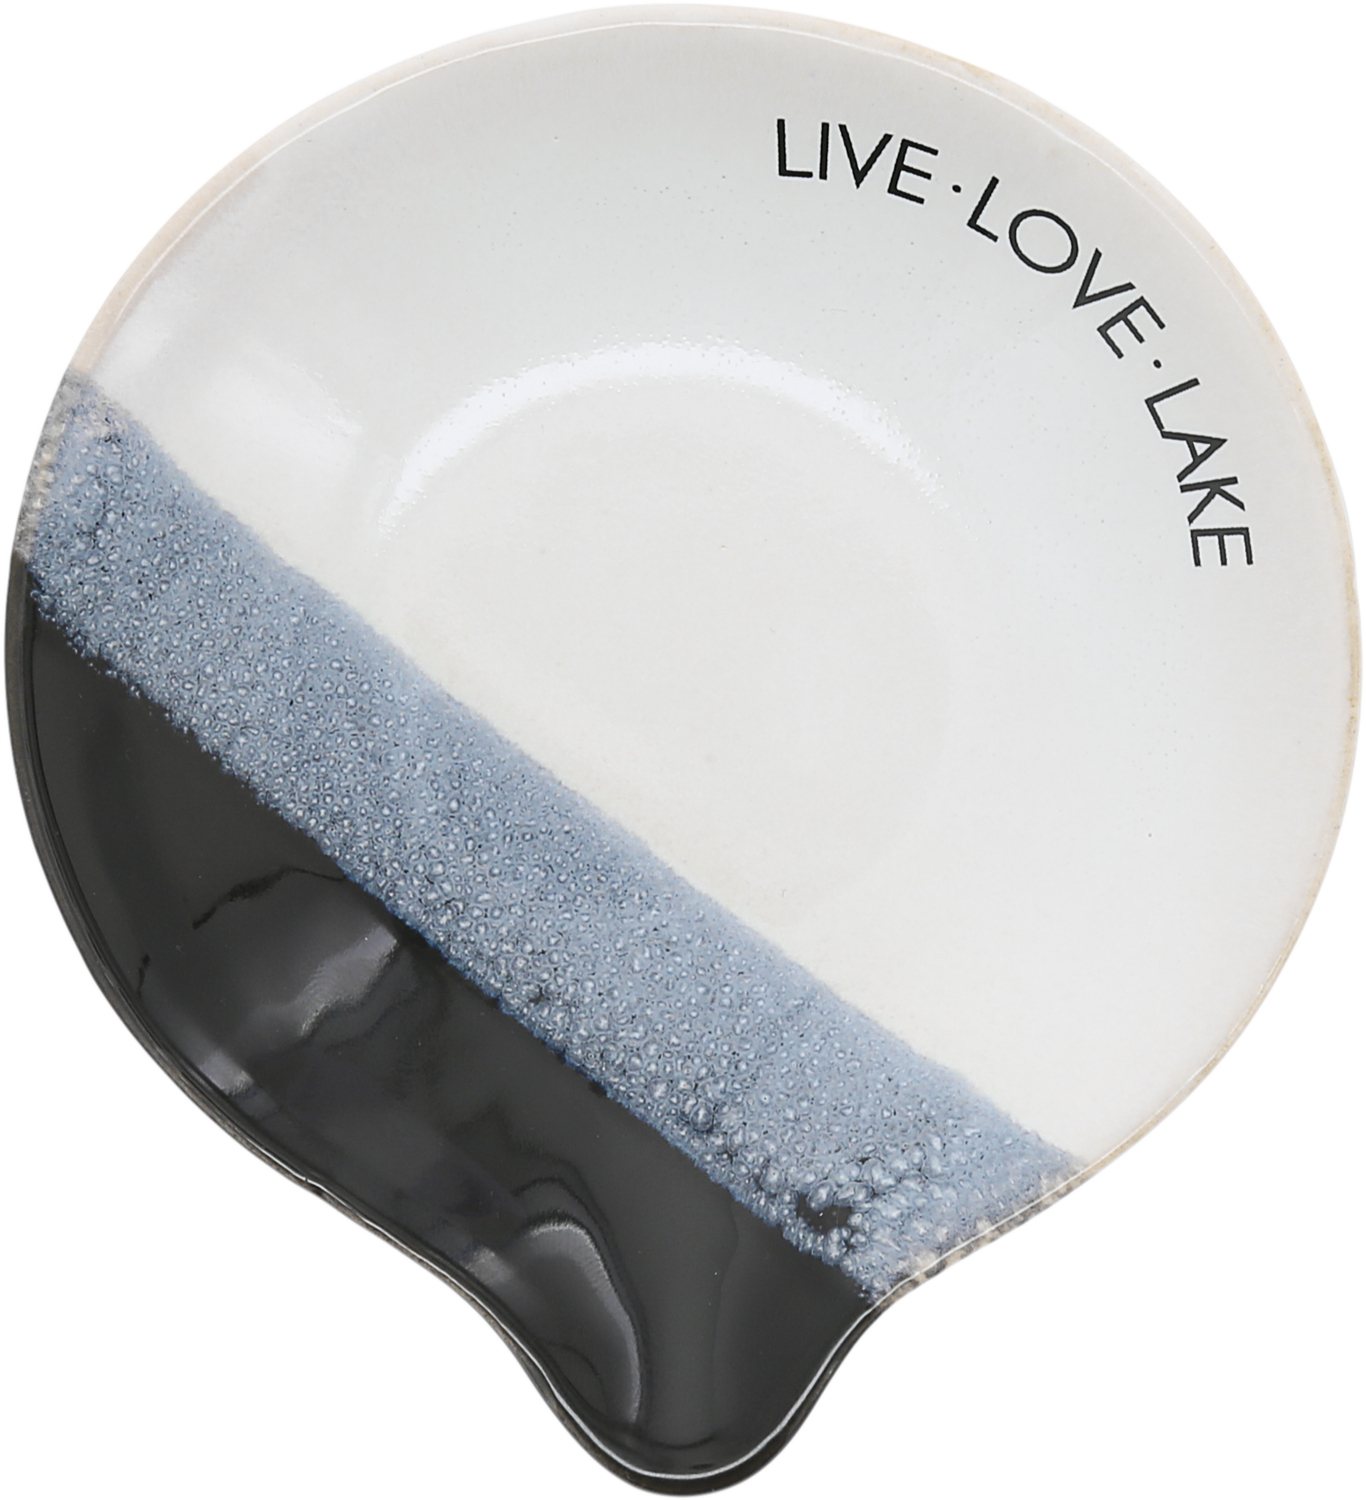 Live Love Lake by Hostess with the Mostess - Live Love Lake - 4" Spoon Rest